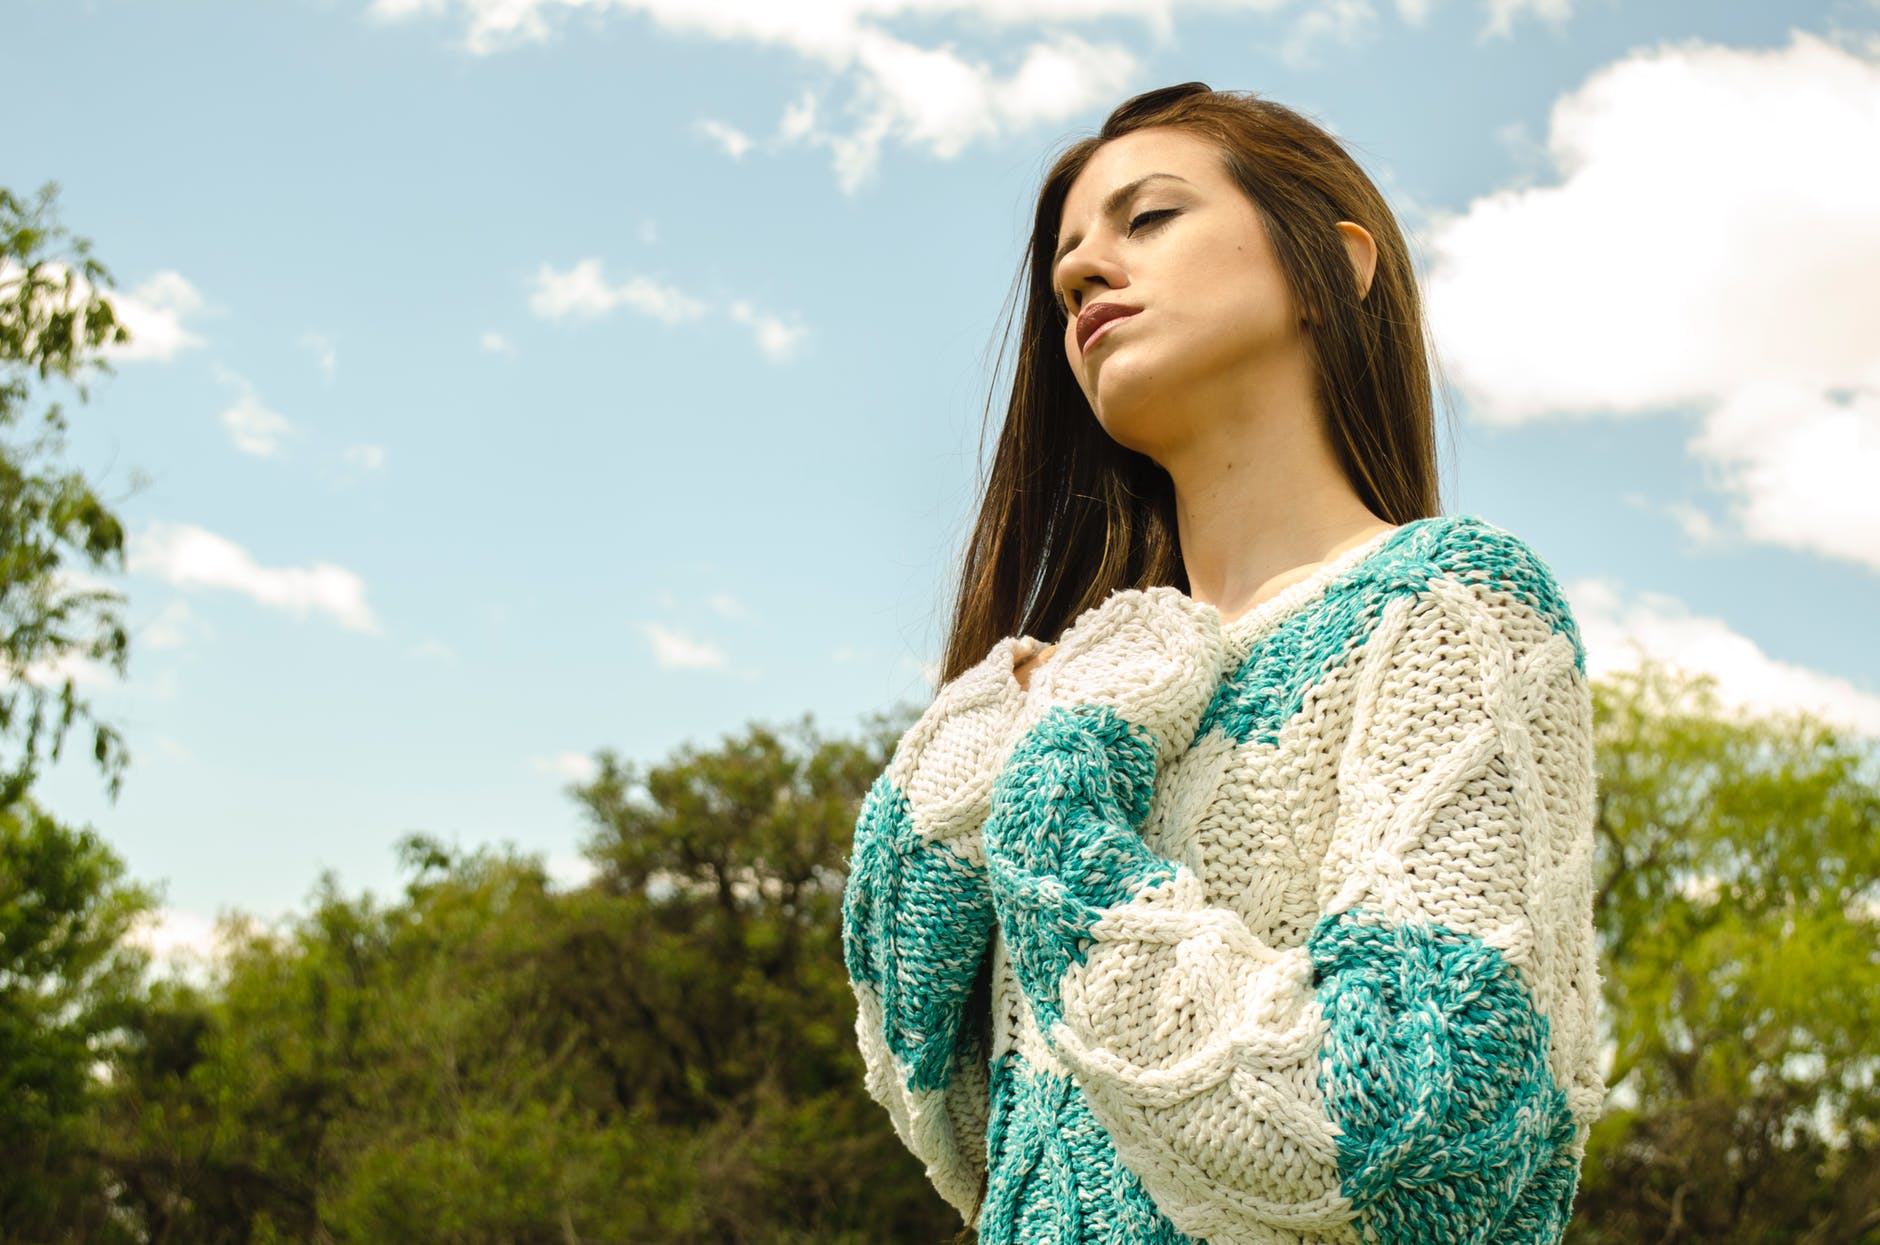 A Fashionista's Guide to Wearing Crochet Top